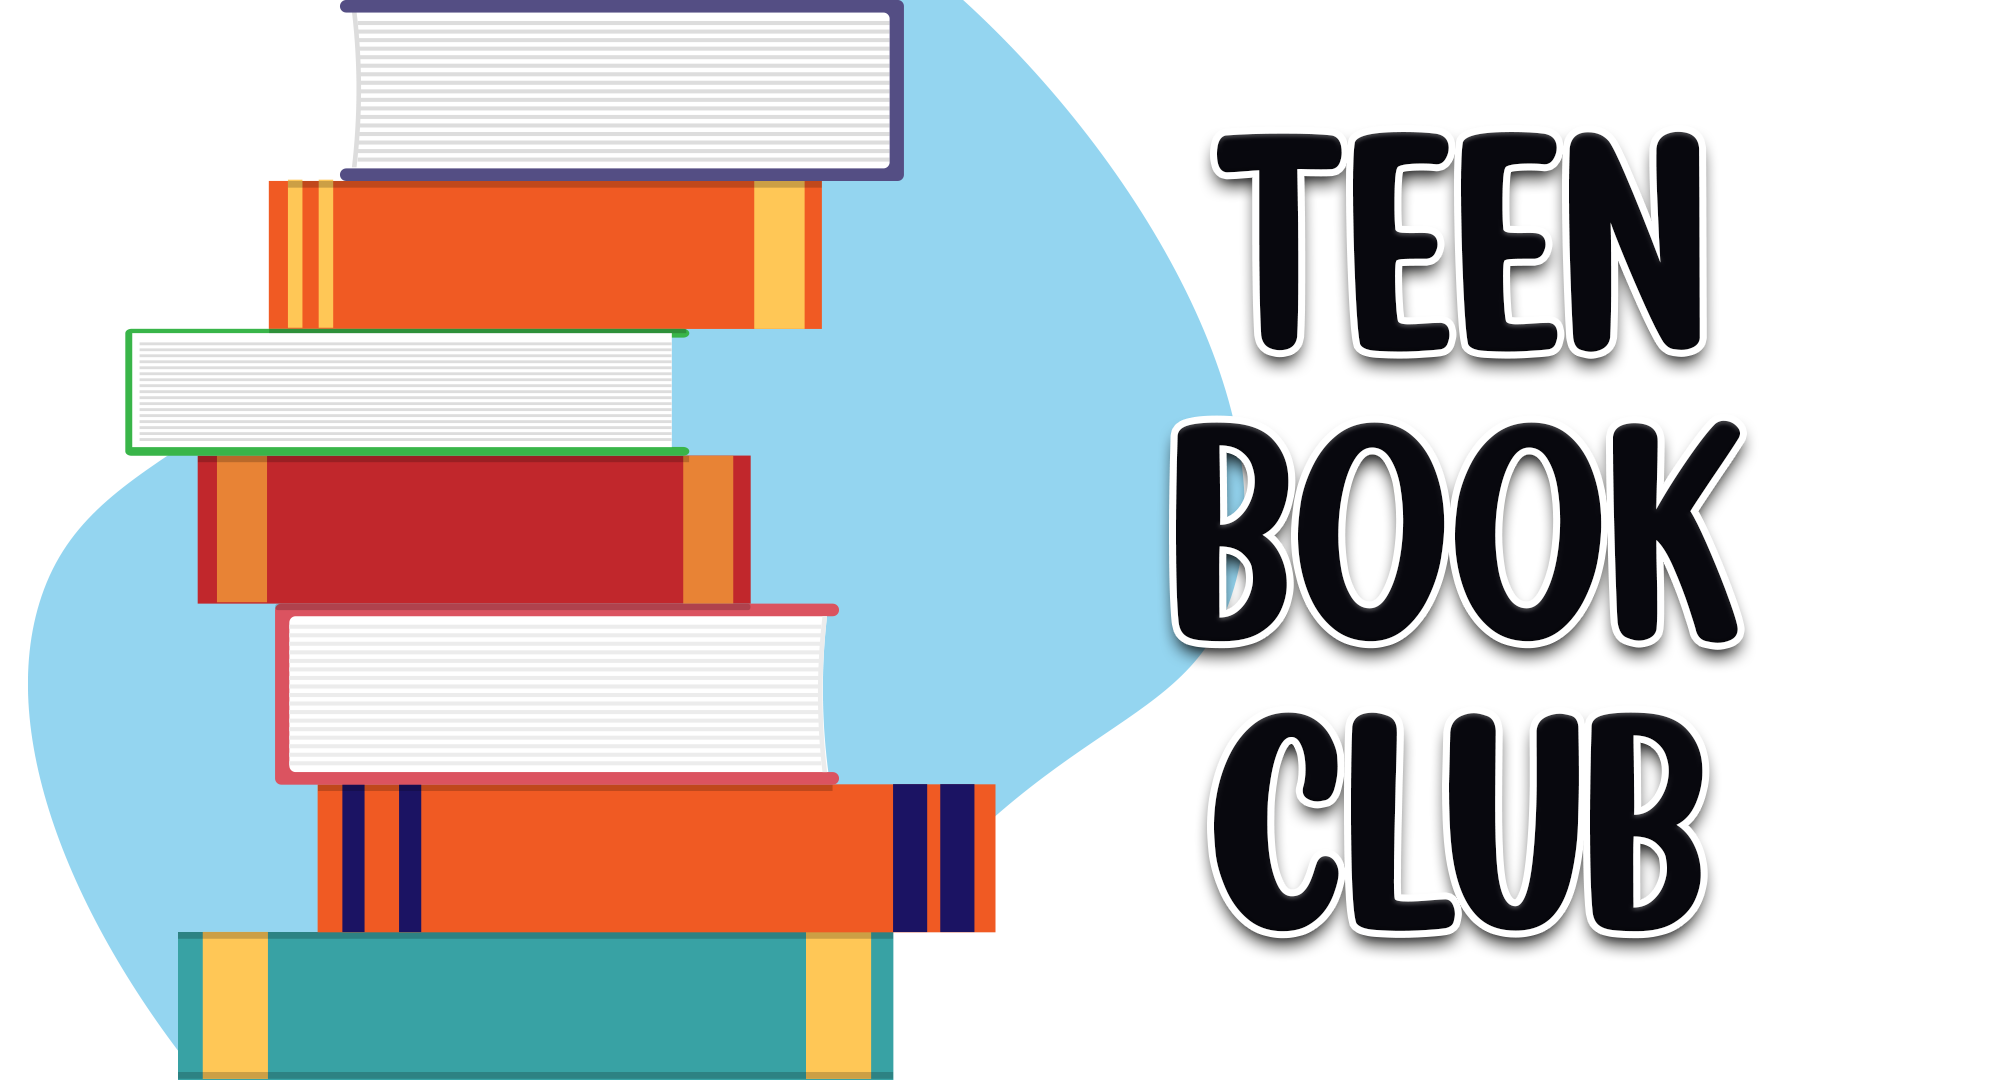 https://nileslibrary.com/wp-content/uploads/2021/09/Teen-Book-Club_WB.png